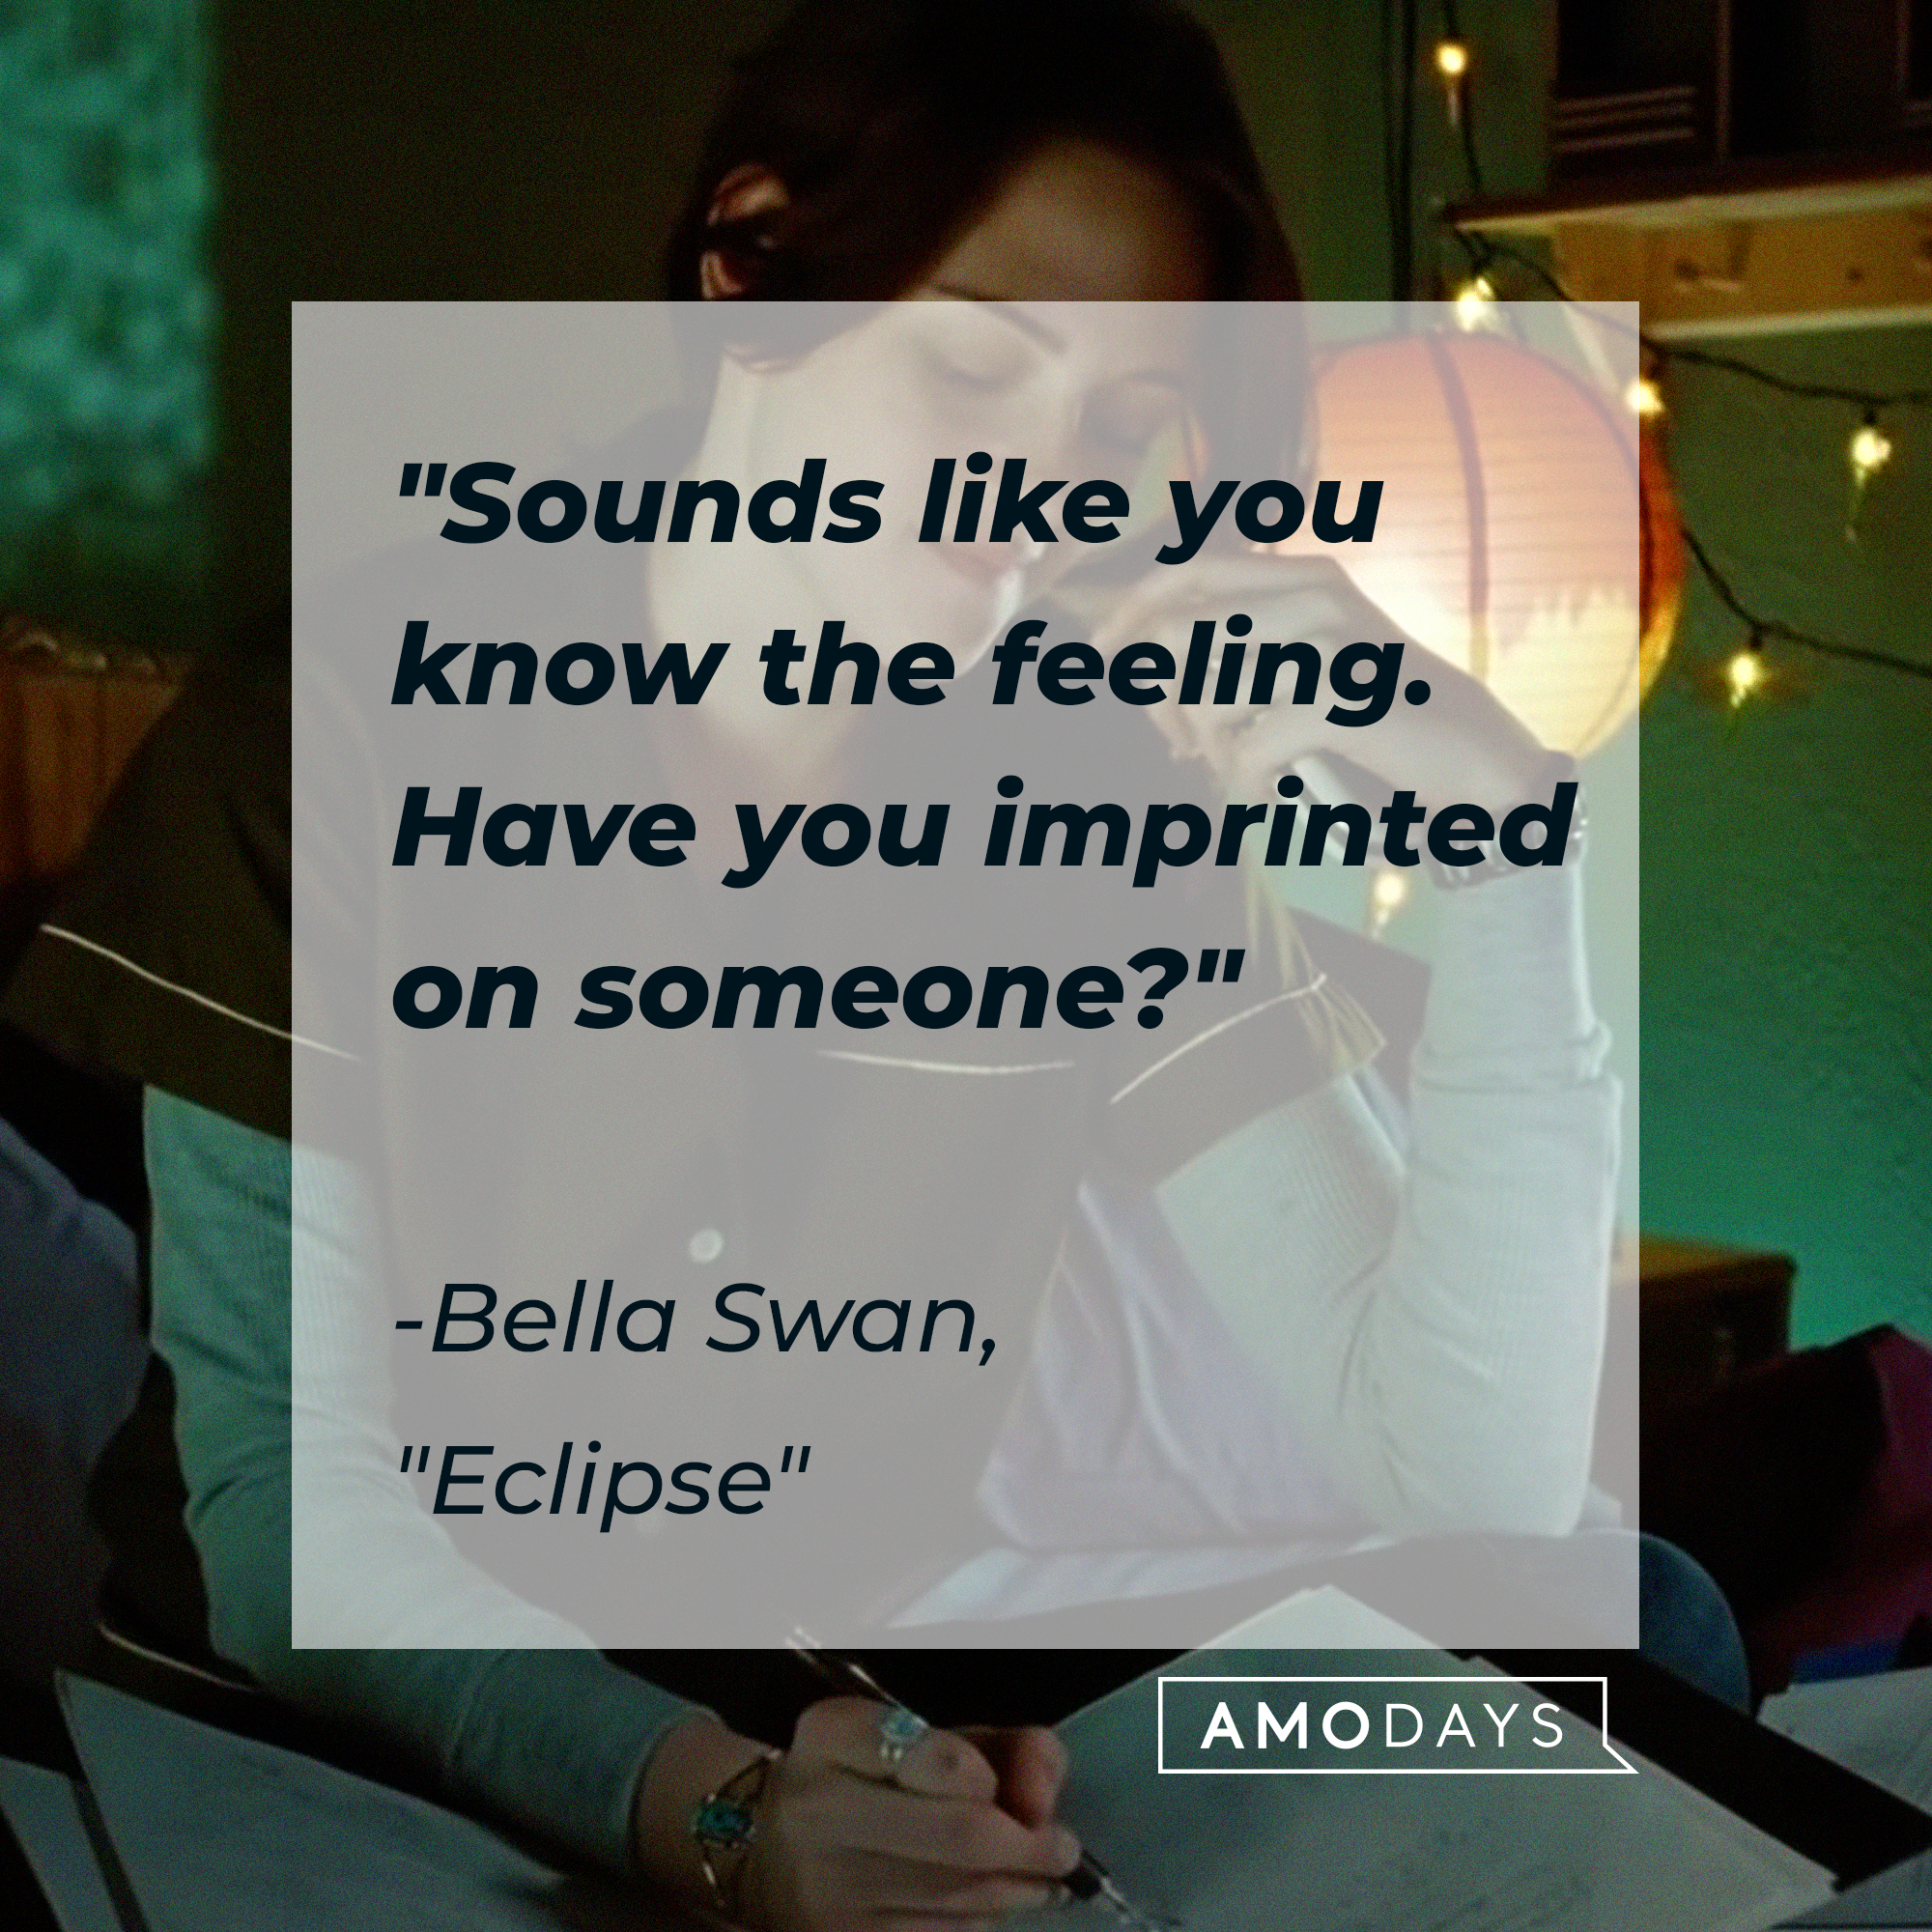 Bella Swan with her quote: "Sounds like you know the feeling. Have you imprinted on someone?" | Source: Facebook.com/twilight